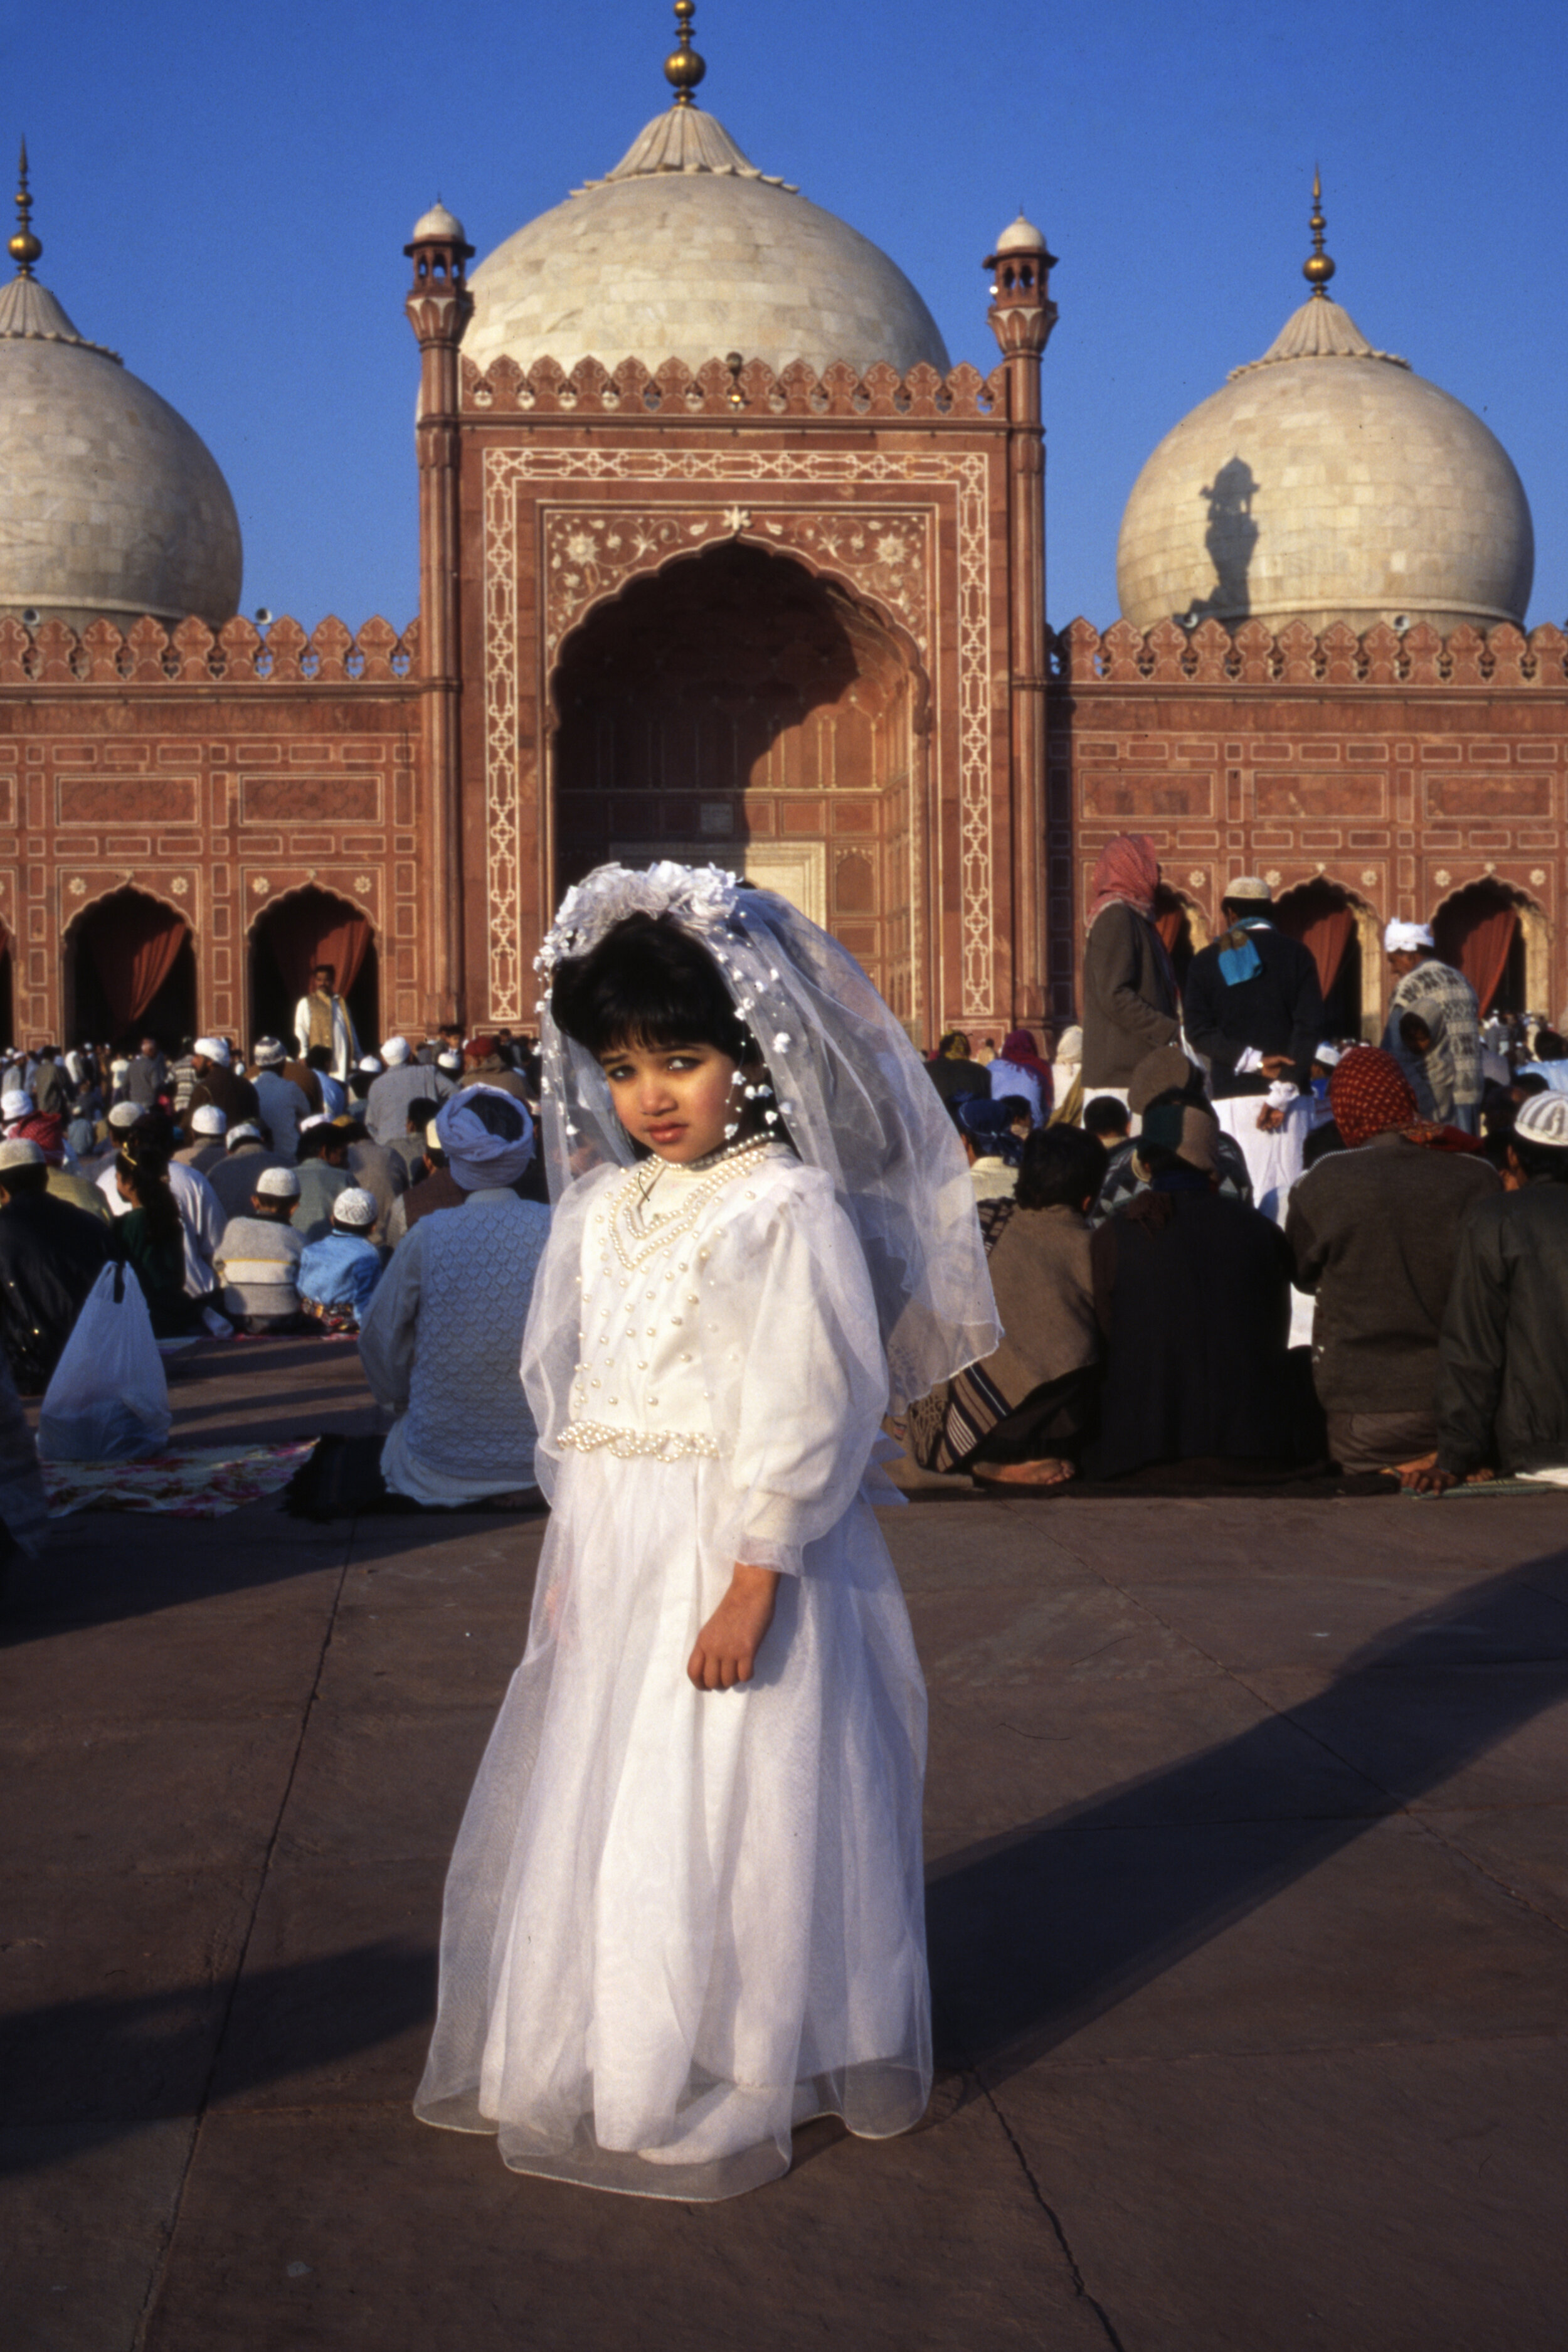  Young girl at Badshahi Mosque March in Lahore, Pakistan. 1997 